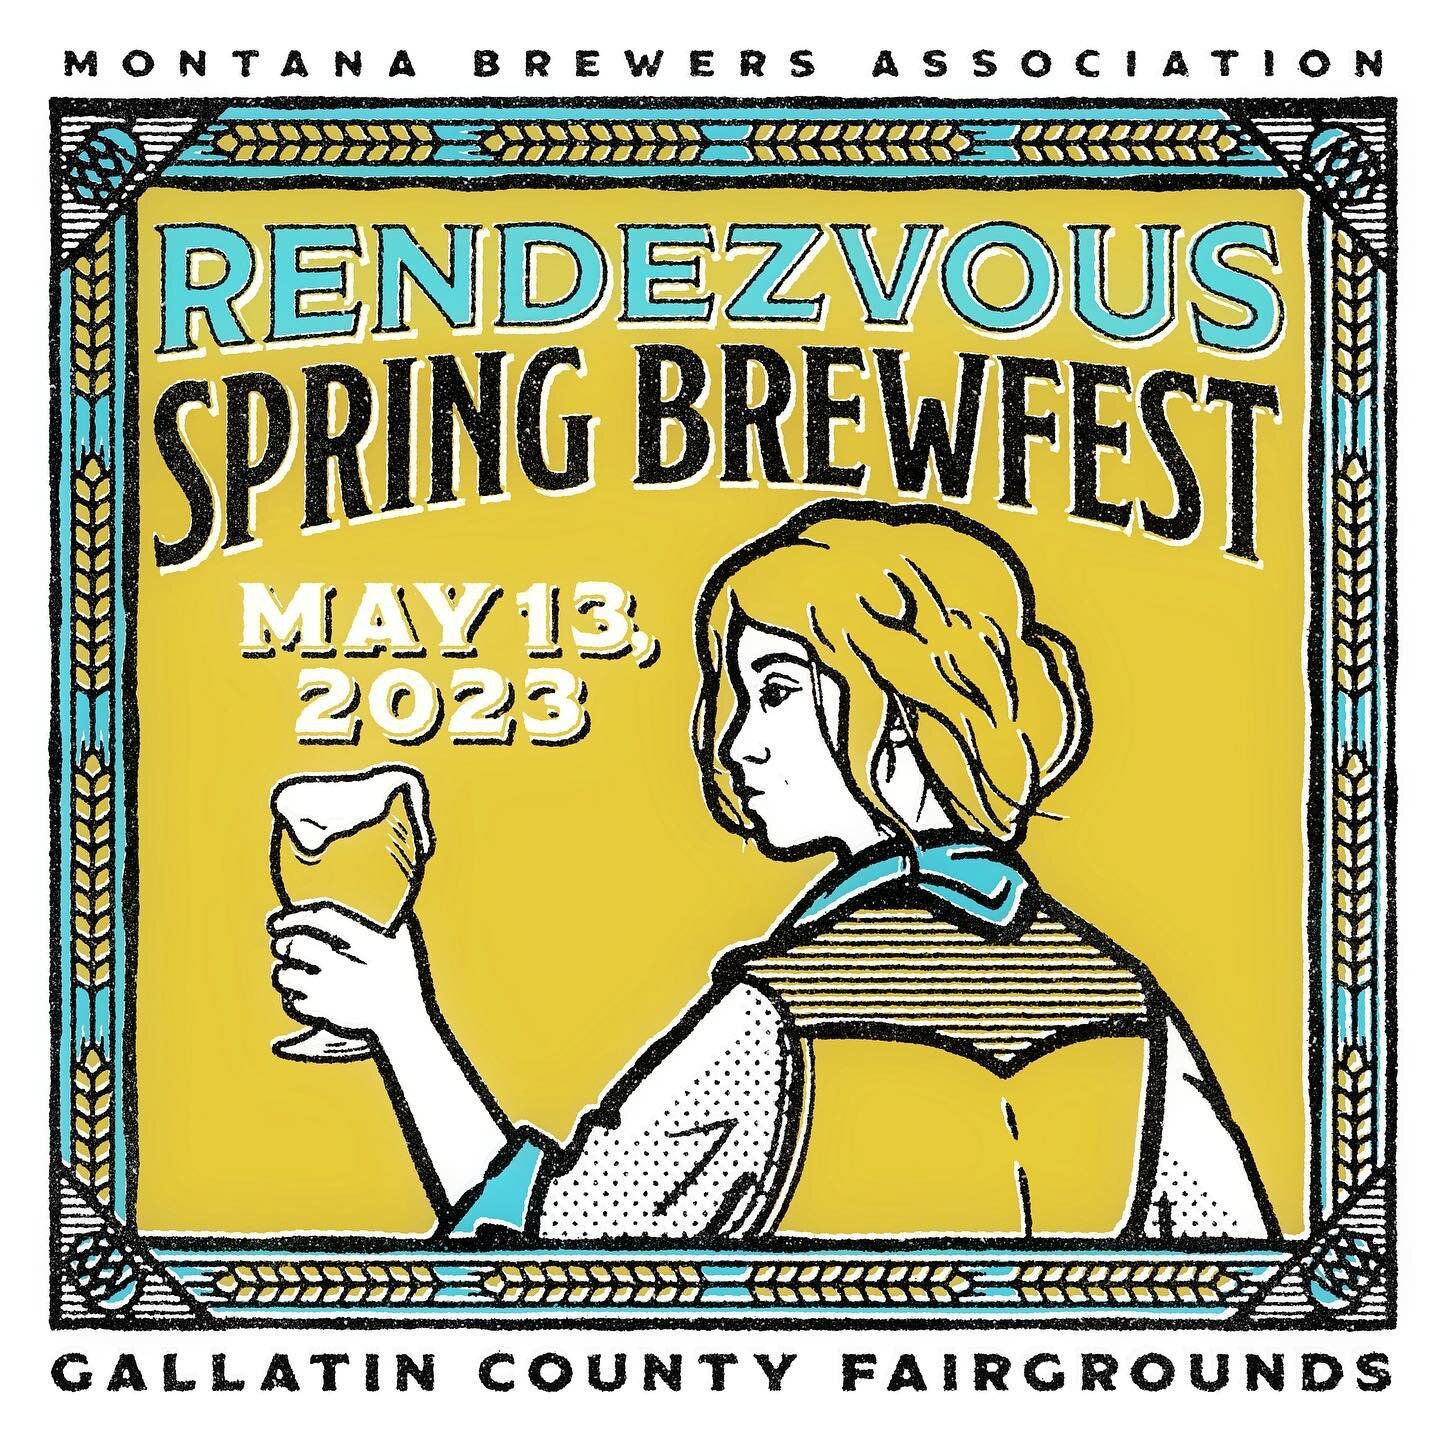 The Montana Brewers Association Rendezvous Spring Brewfest. May 13 at the Gallatin County Fairgrounds in Bozeman, Mt @montanabrewers #brewfest #montanabeer #montanabreweries #bozeman #montana #montanartist #veteranartist